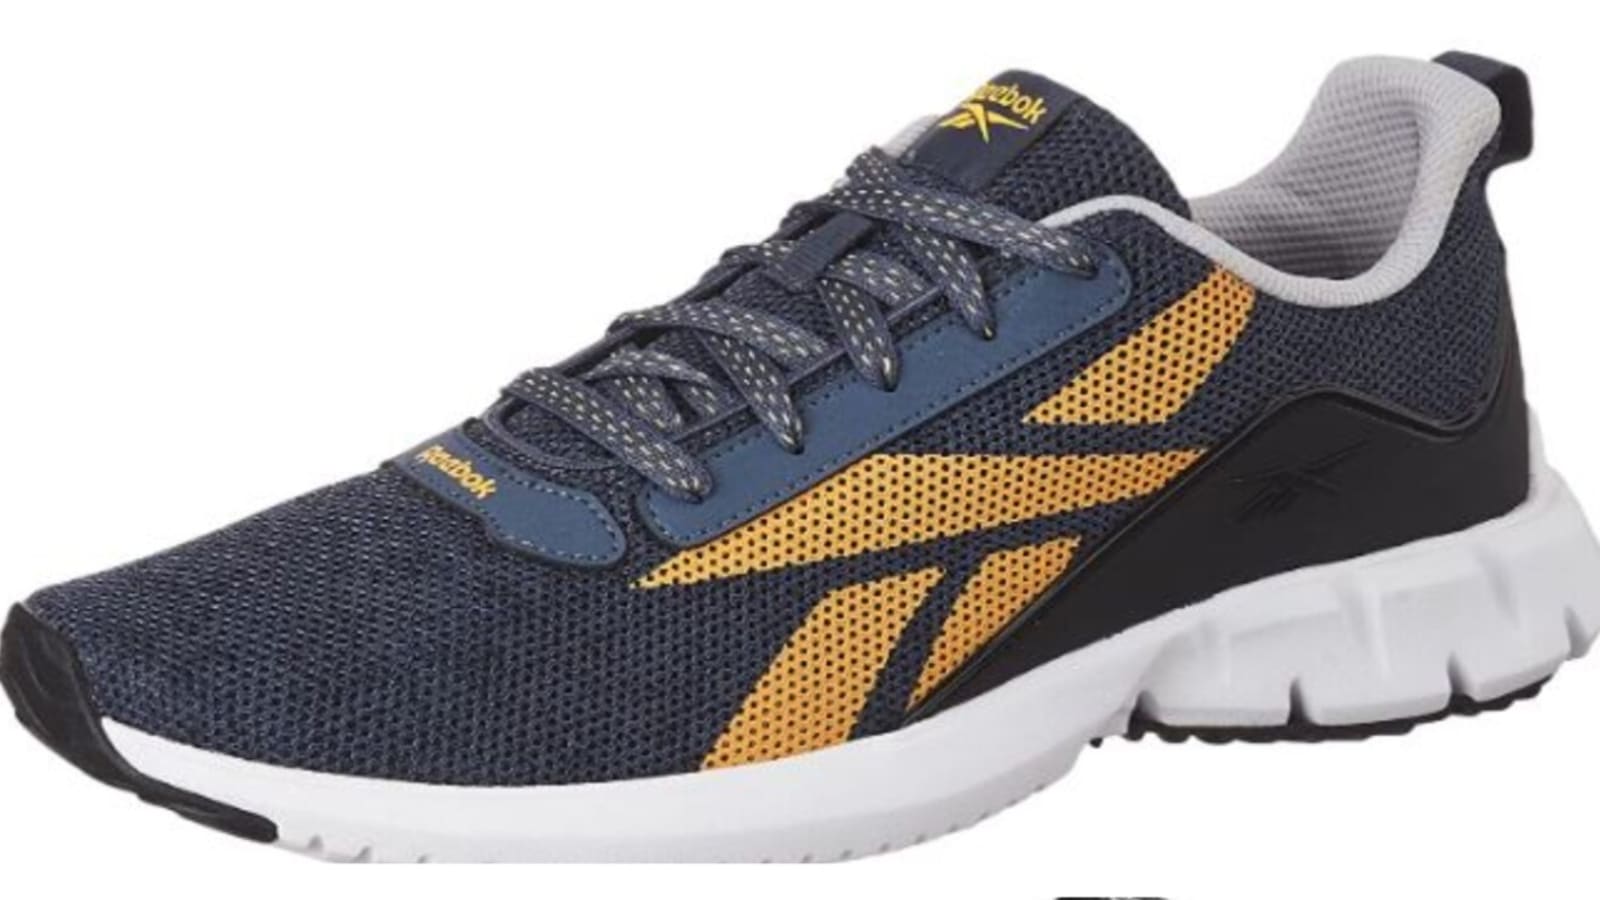 Buy Sports Shoes For Women Under INR 5000